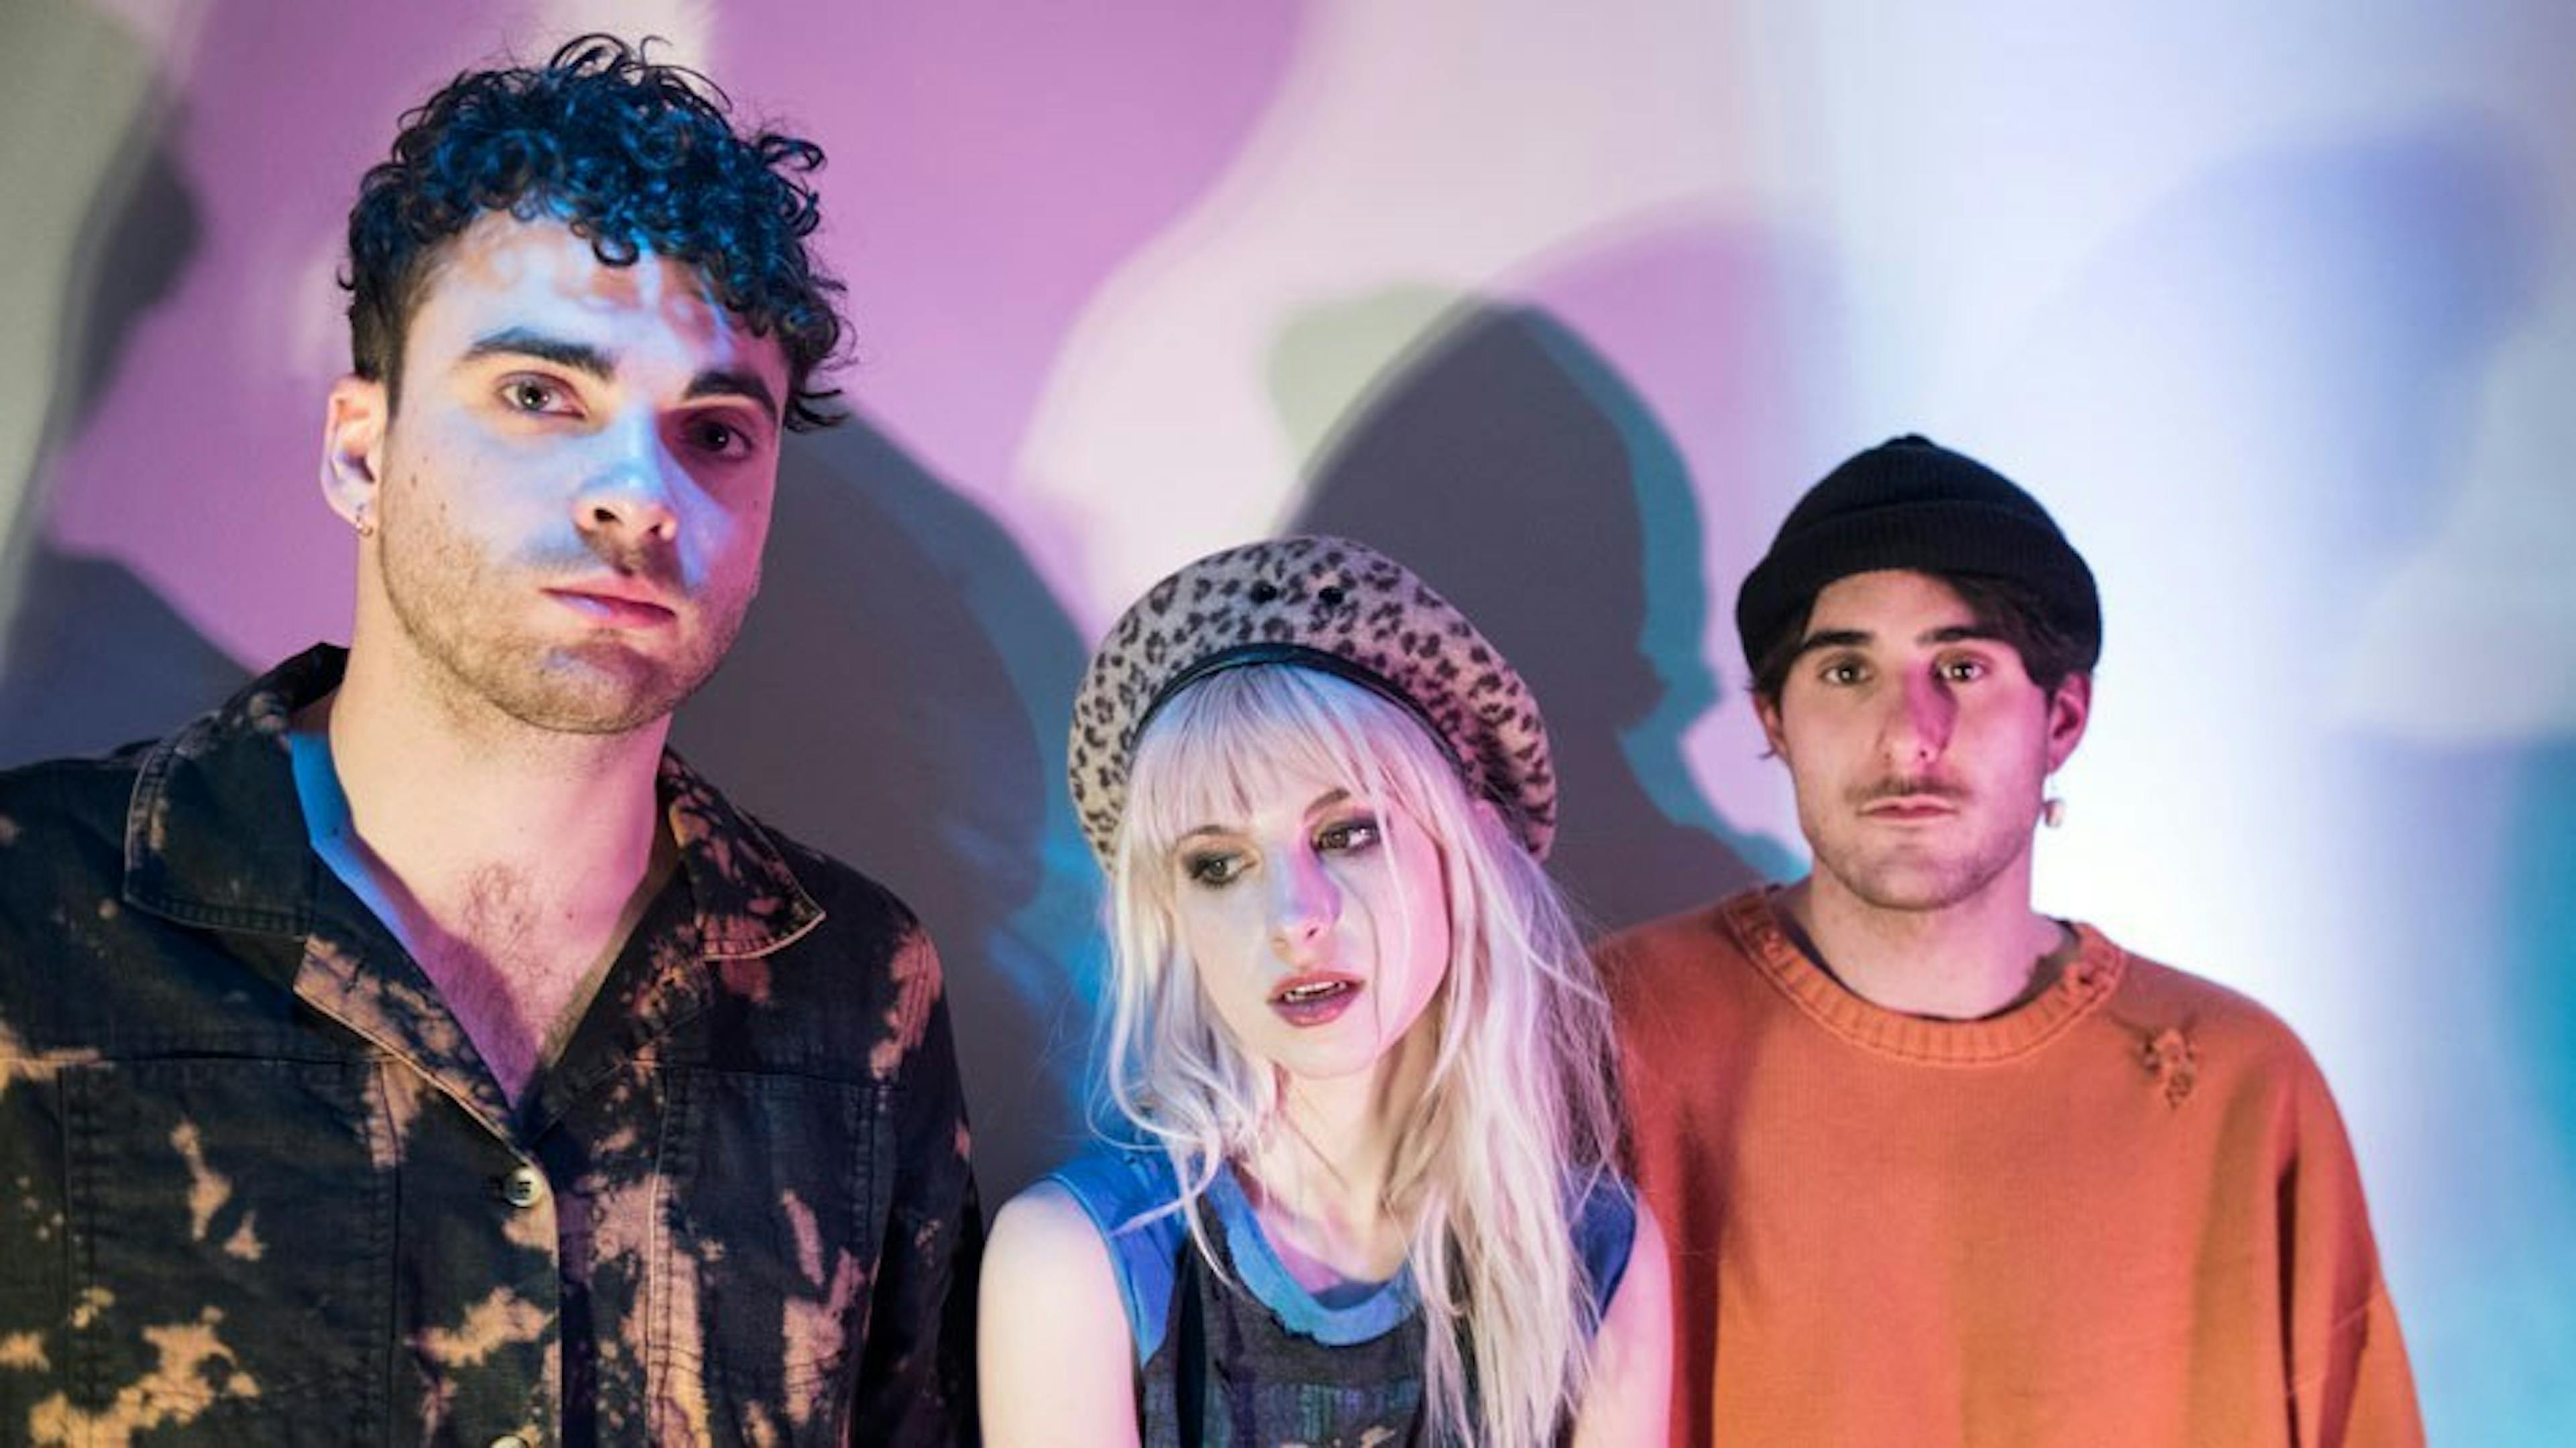 Hayley Williams: "I Really Don’t Know What’s Next For Paramore"